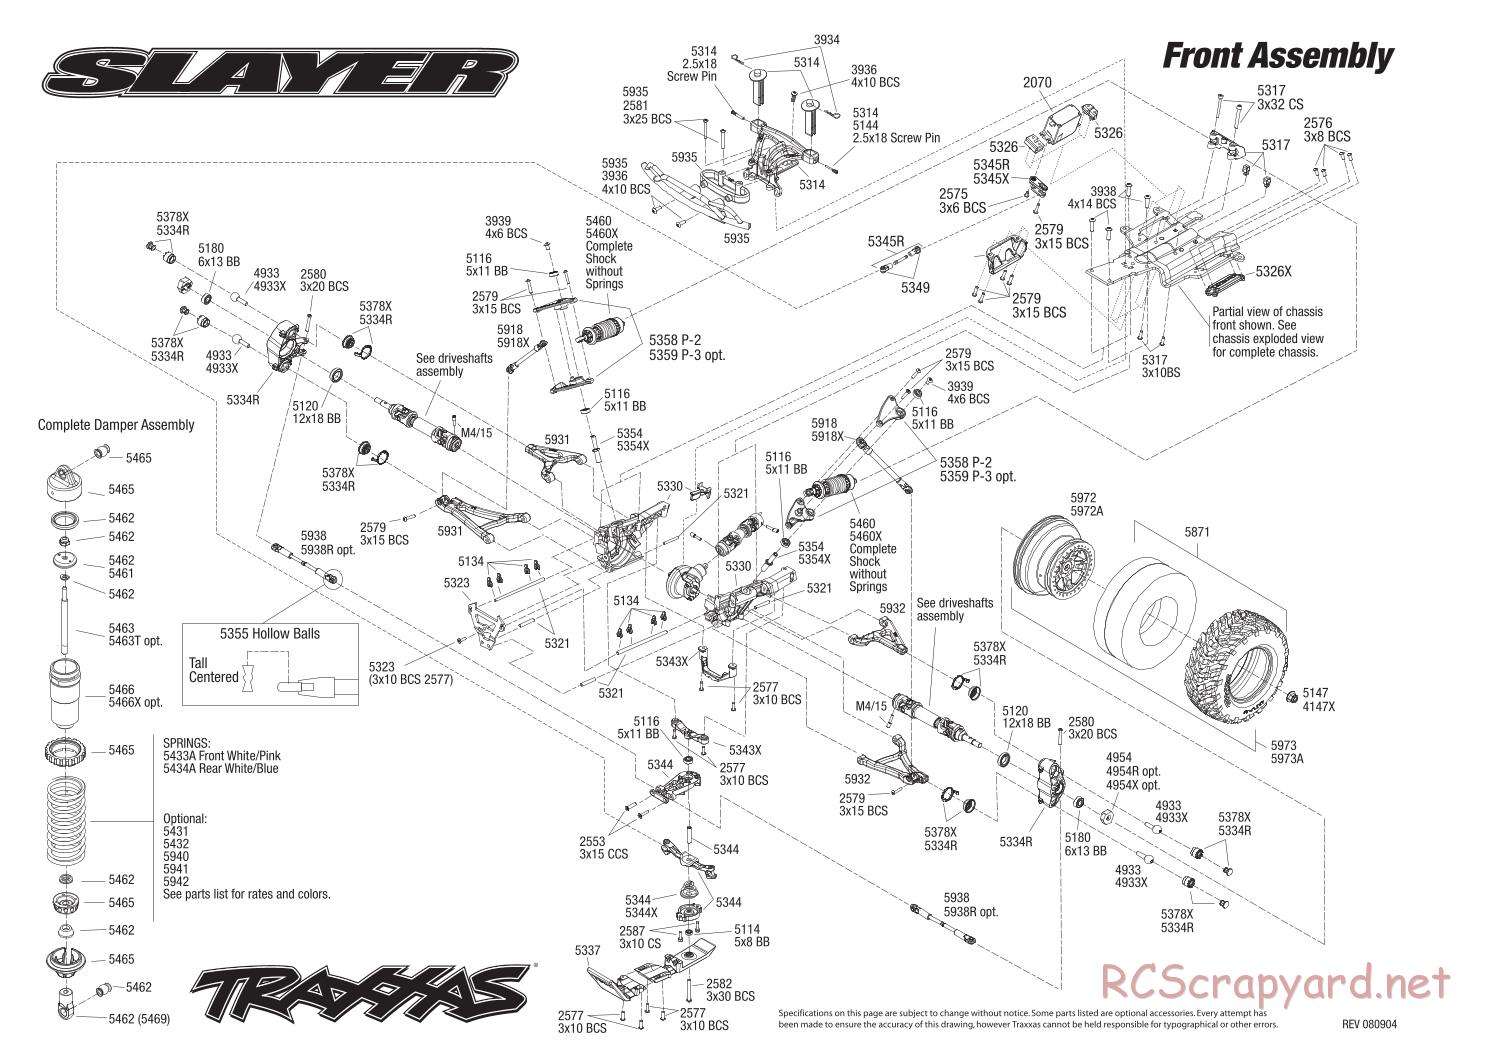 Traxxas - Slayer Pro 4WD (2008) - Exploded Views - Page 2